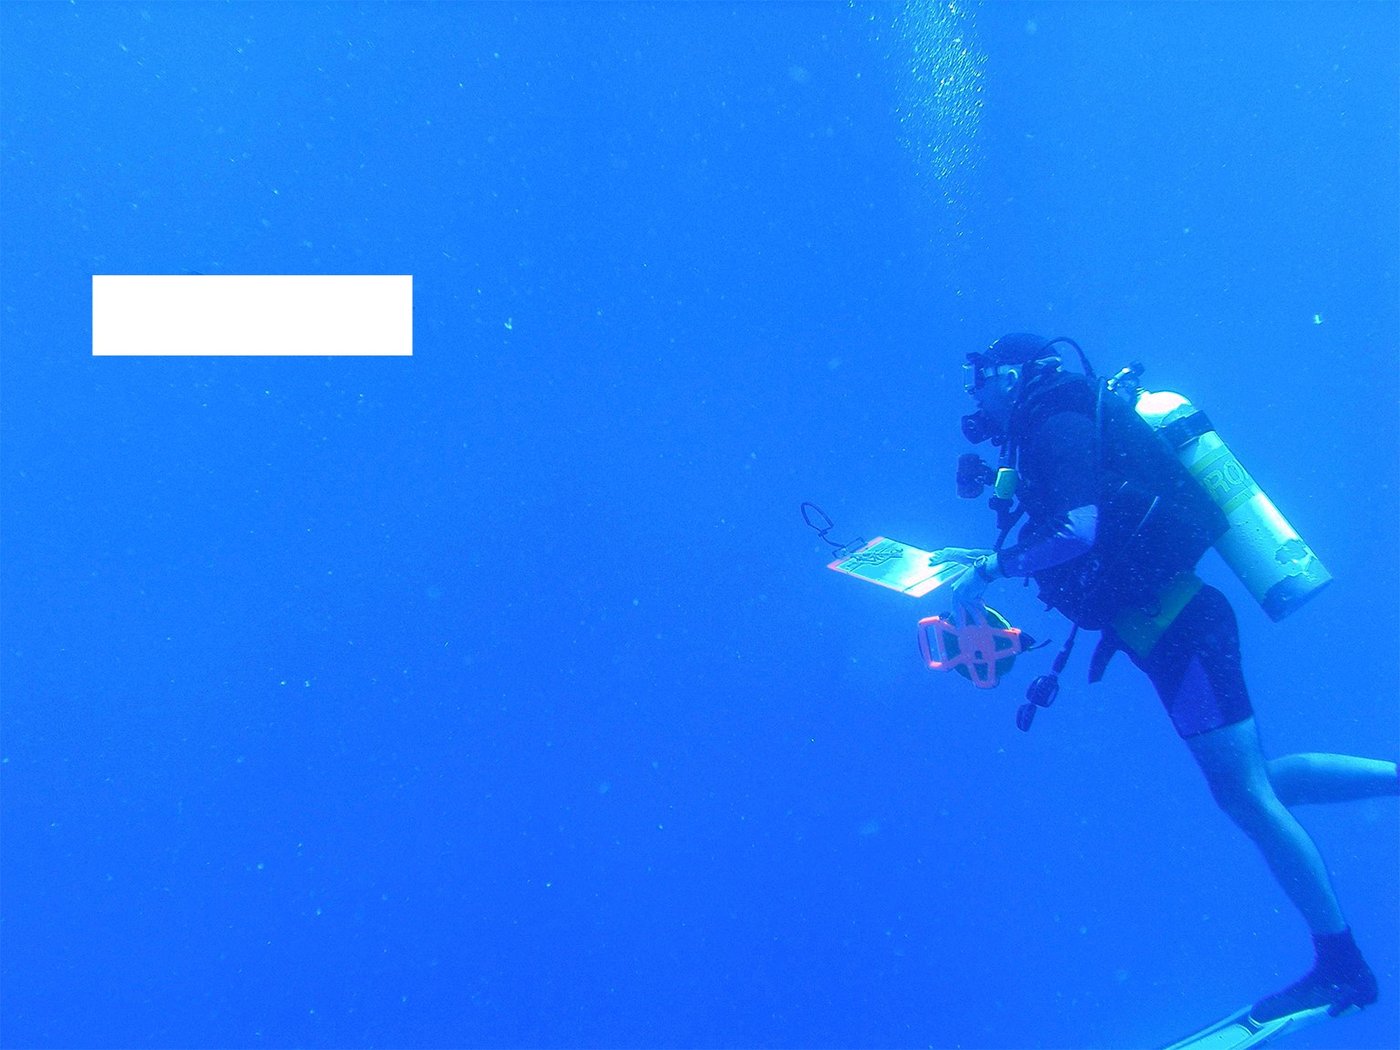 diver under water. Where one might expect to see a fish, there is a black area blocking the view.